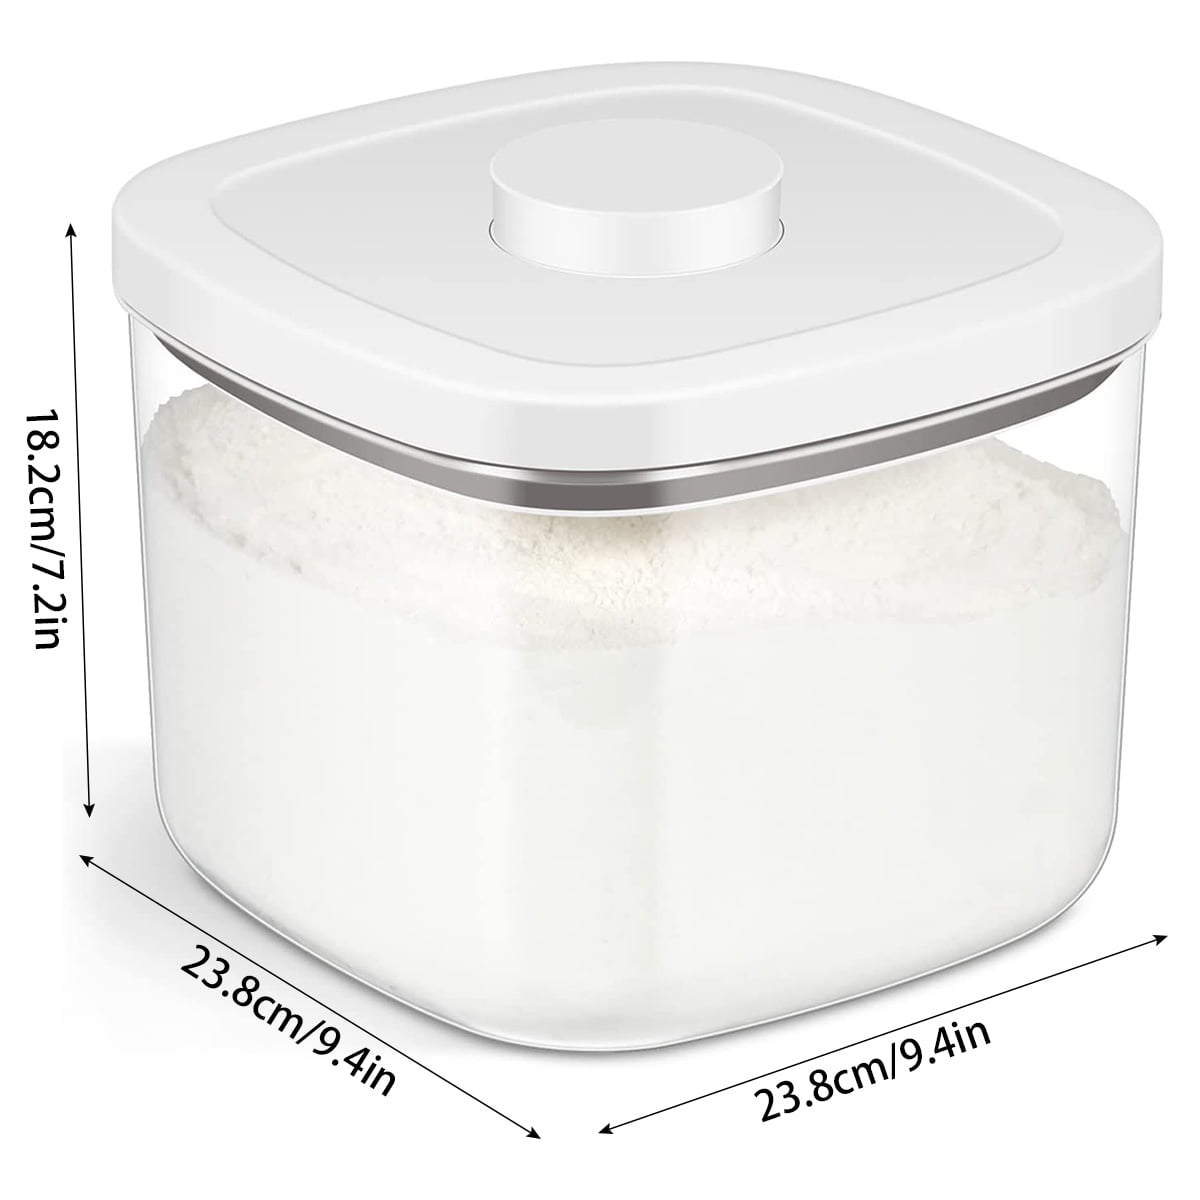 1pc Transparent Sealed Food Storage Container With Lid And Measuring Cup  For Flour, Sugar, Grains, Rice And Baking Supplies. Organizes Kitchen And  Pantry, Stores Bulk Food.